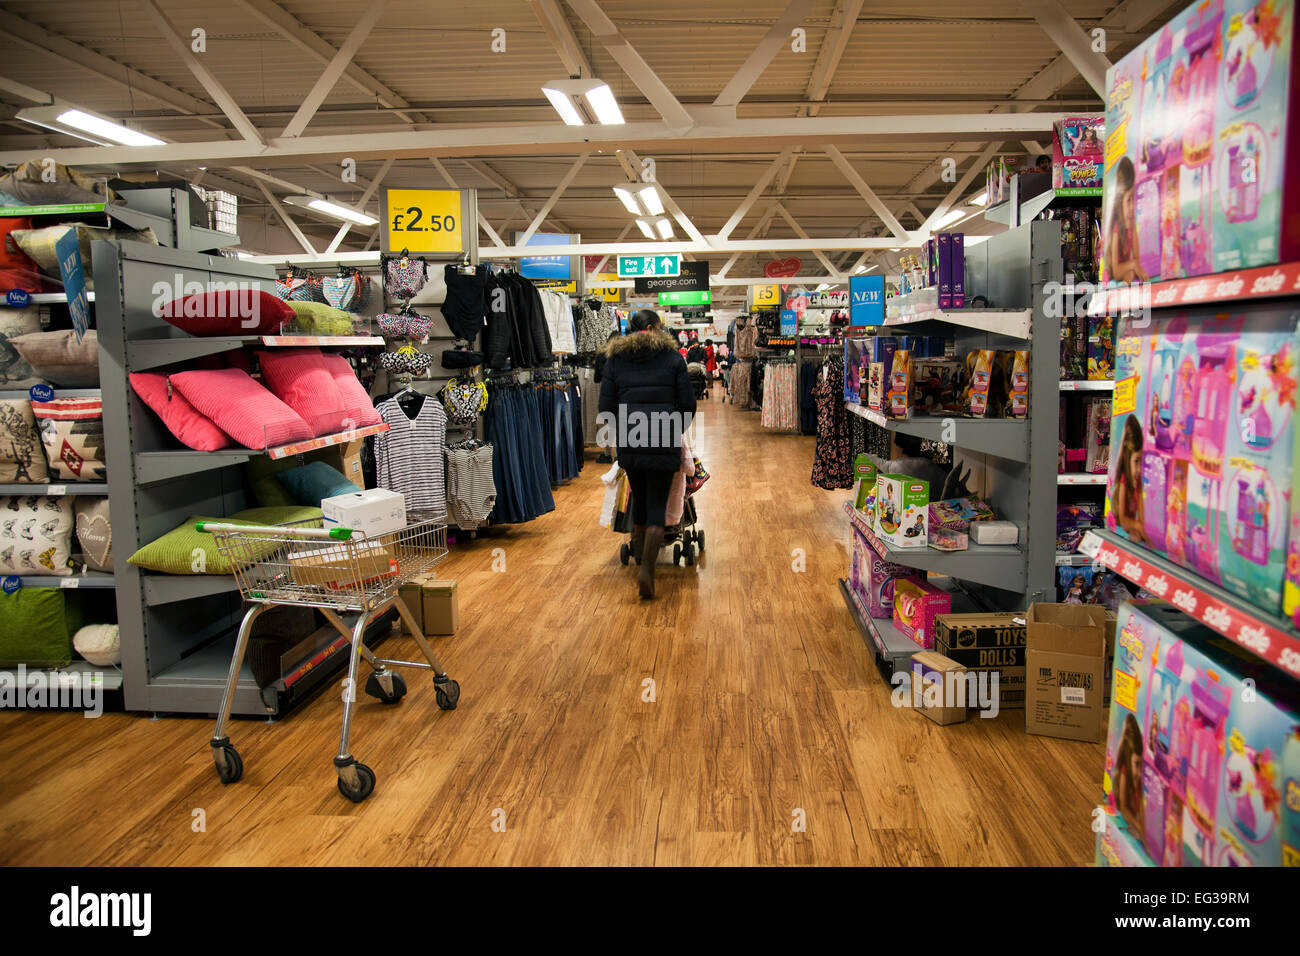 Asda - George Clothing and Furnishings Department Stock Photo